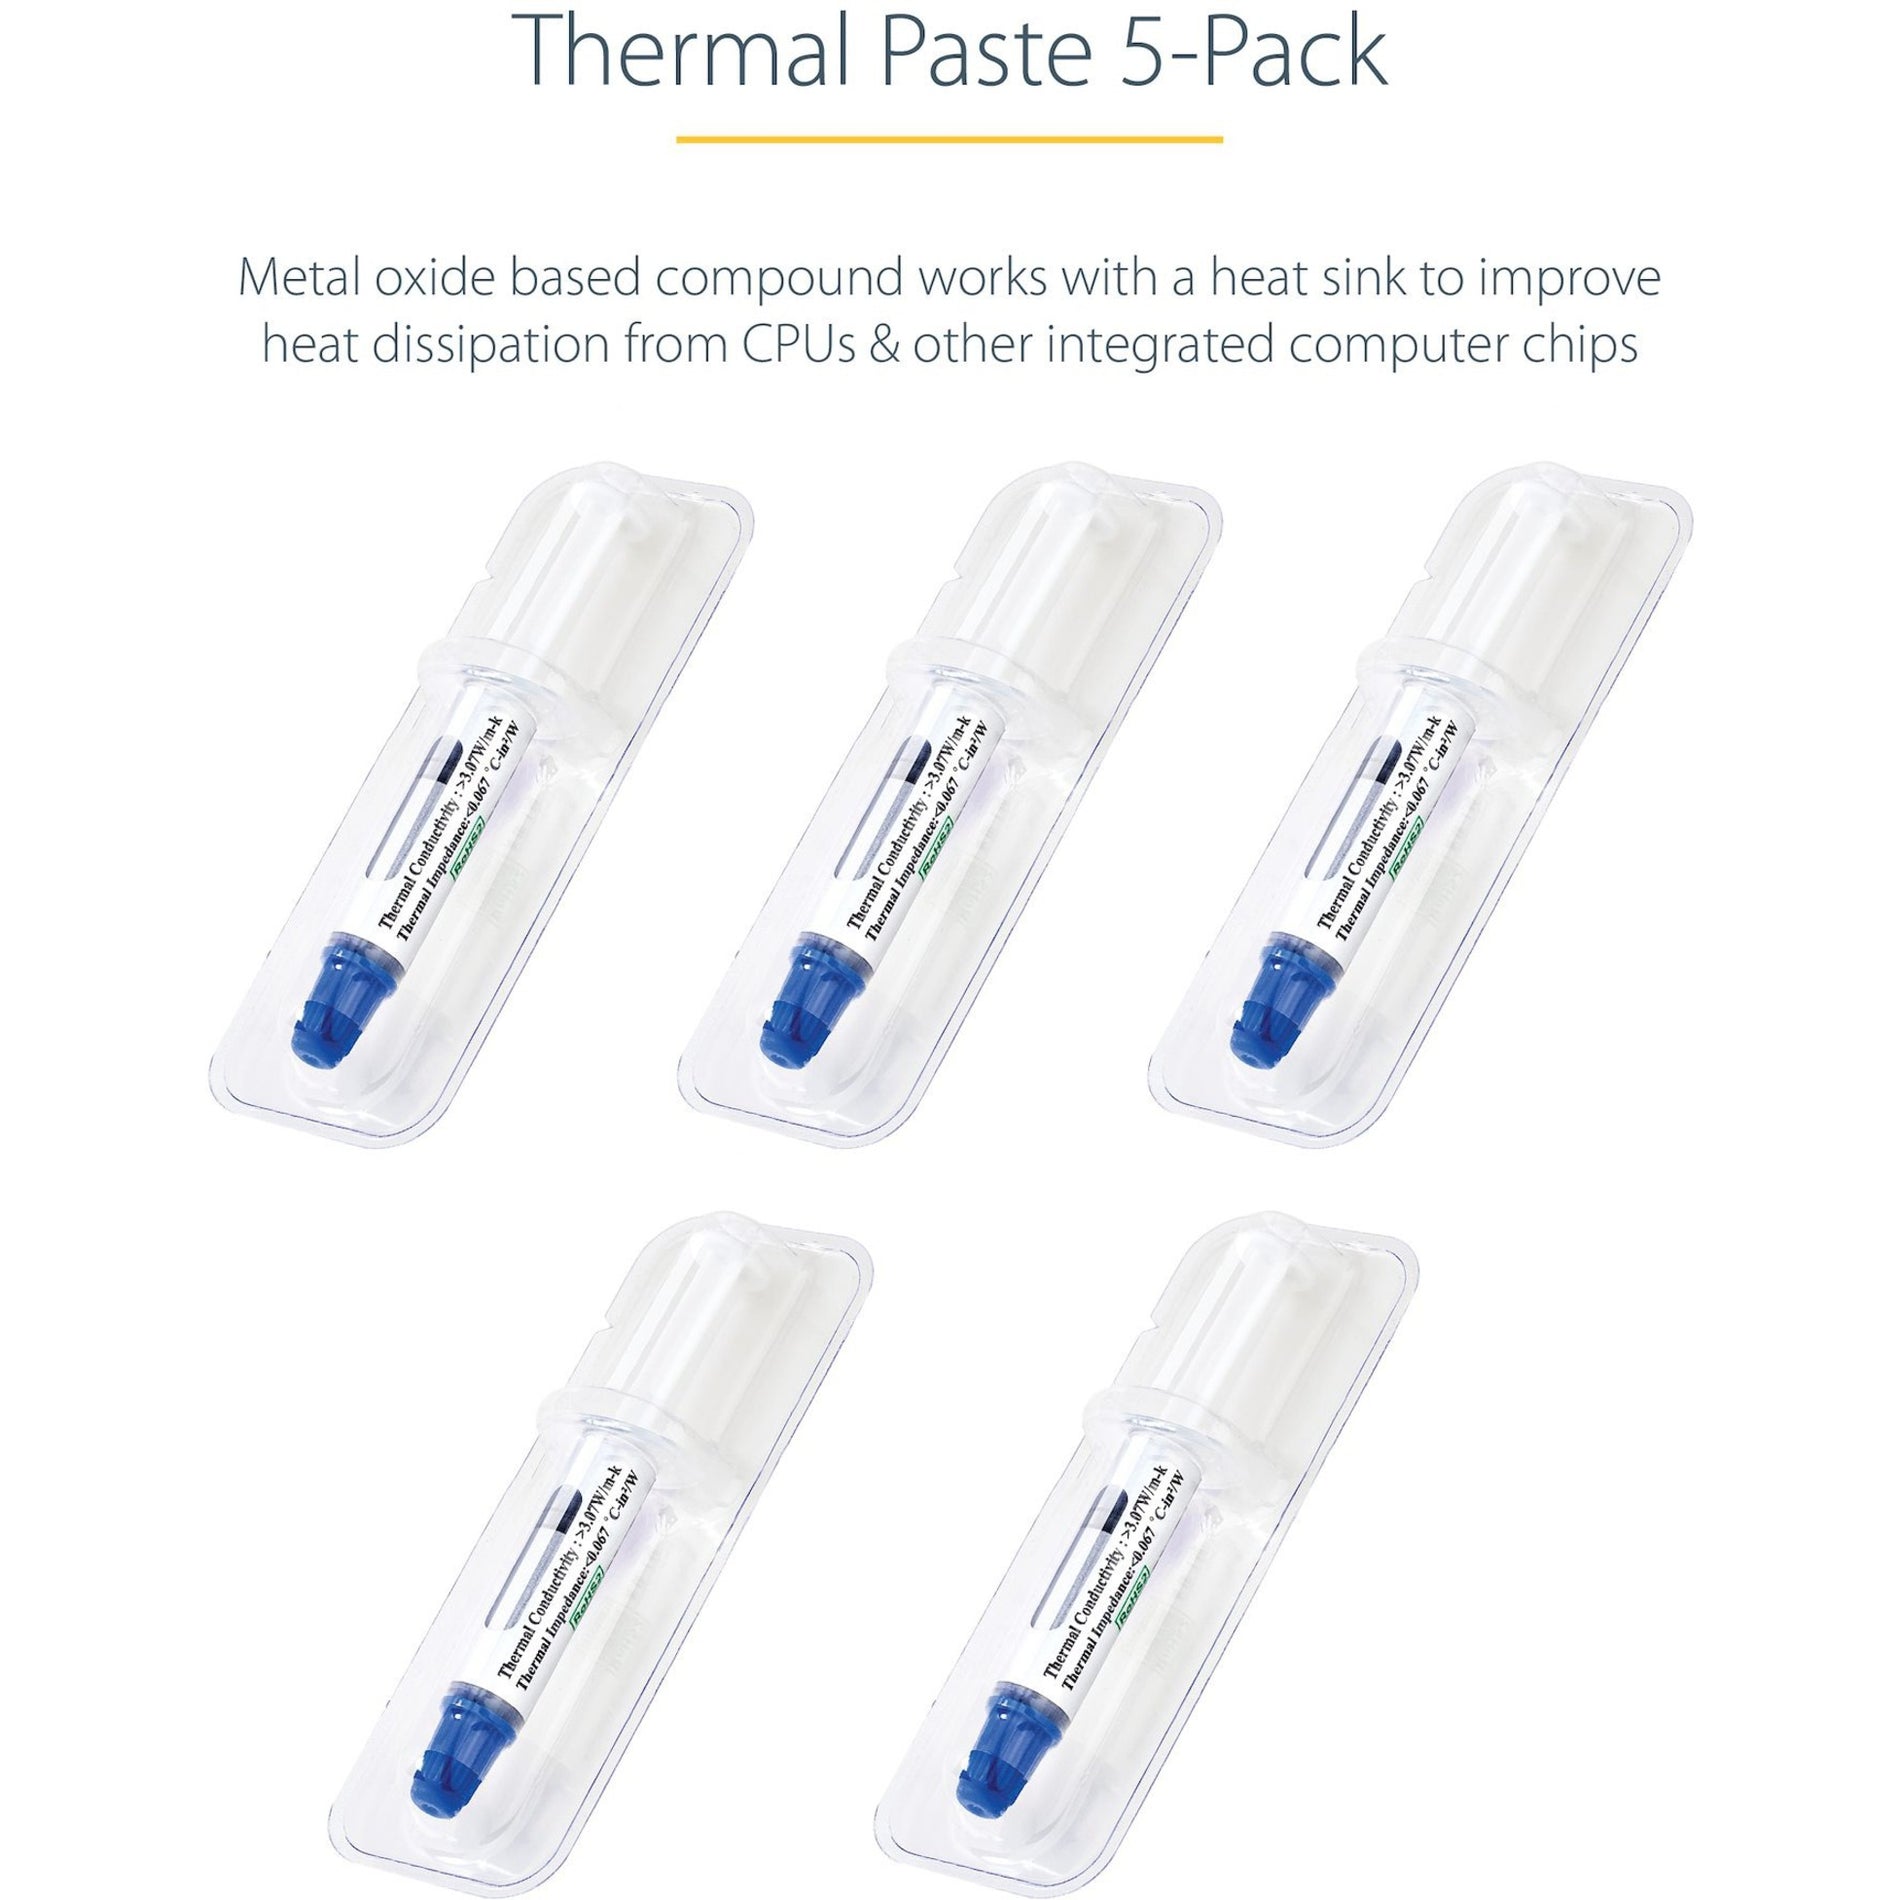 StarTech.com SILV5-THERMAL-PASTE Thermal Grease, High Performance Metal Oxide Heat Sink Compound, Pack of 5 Syringes